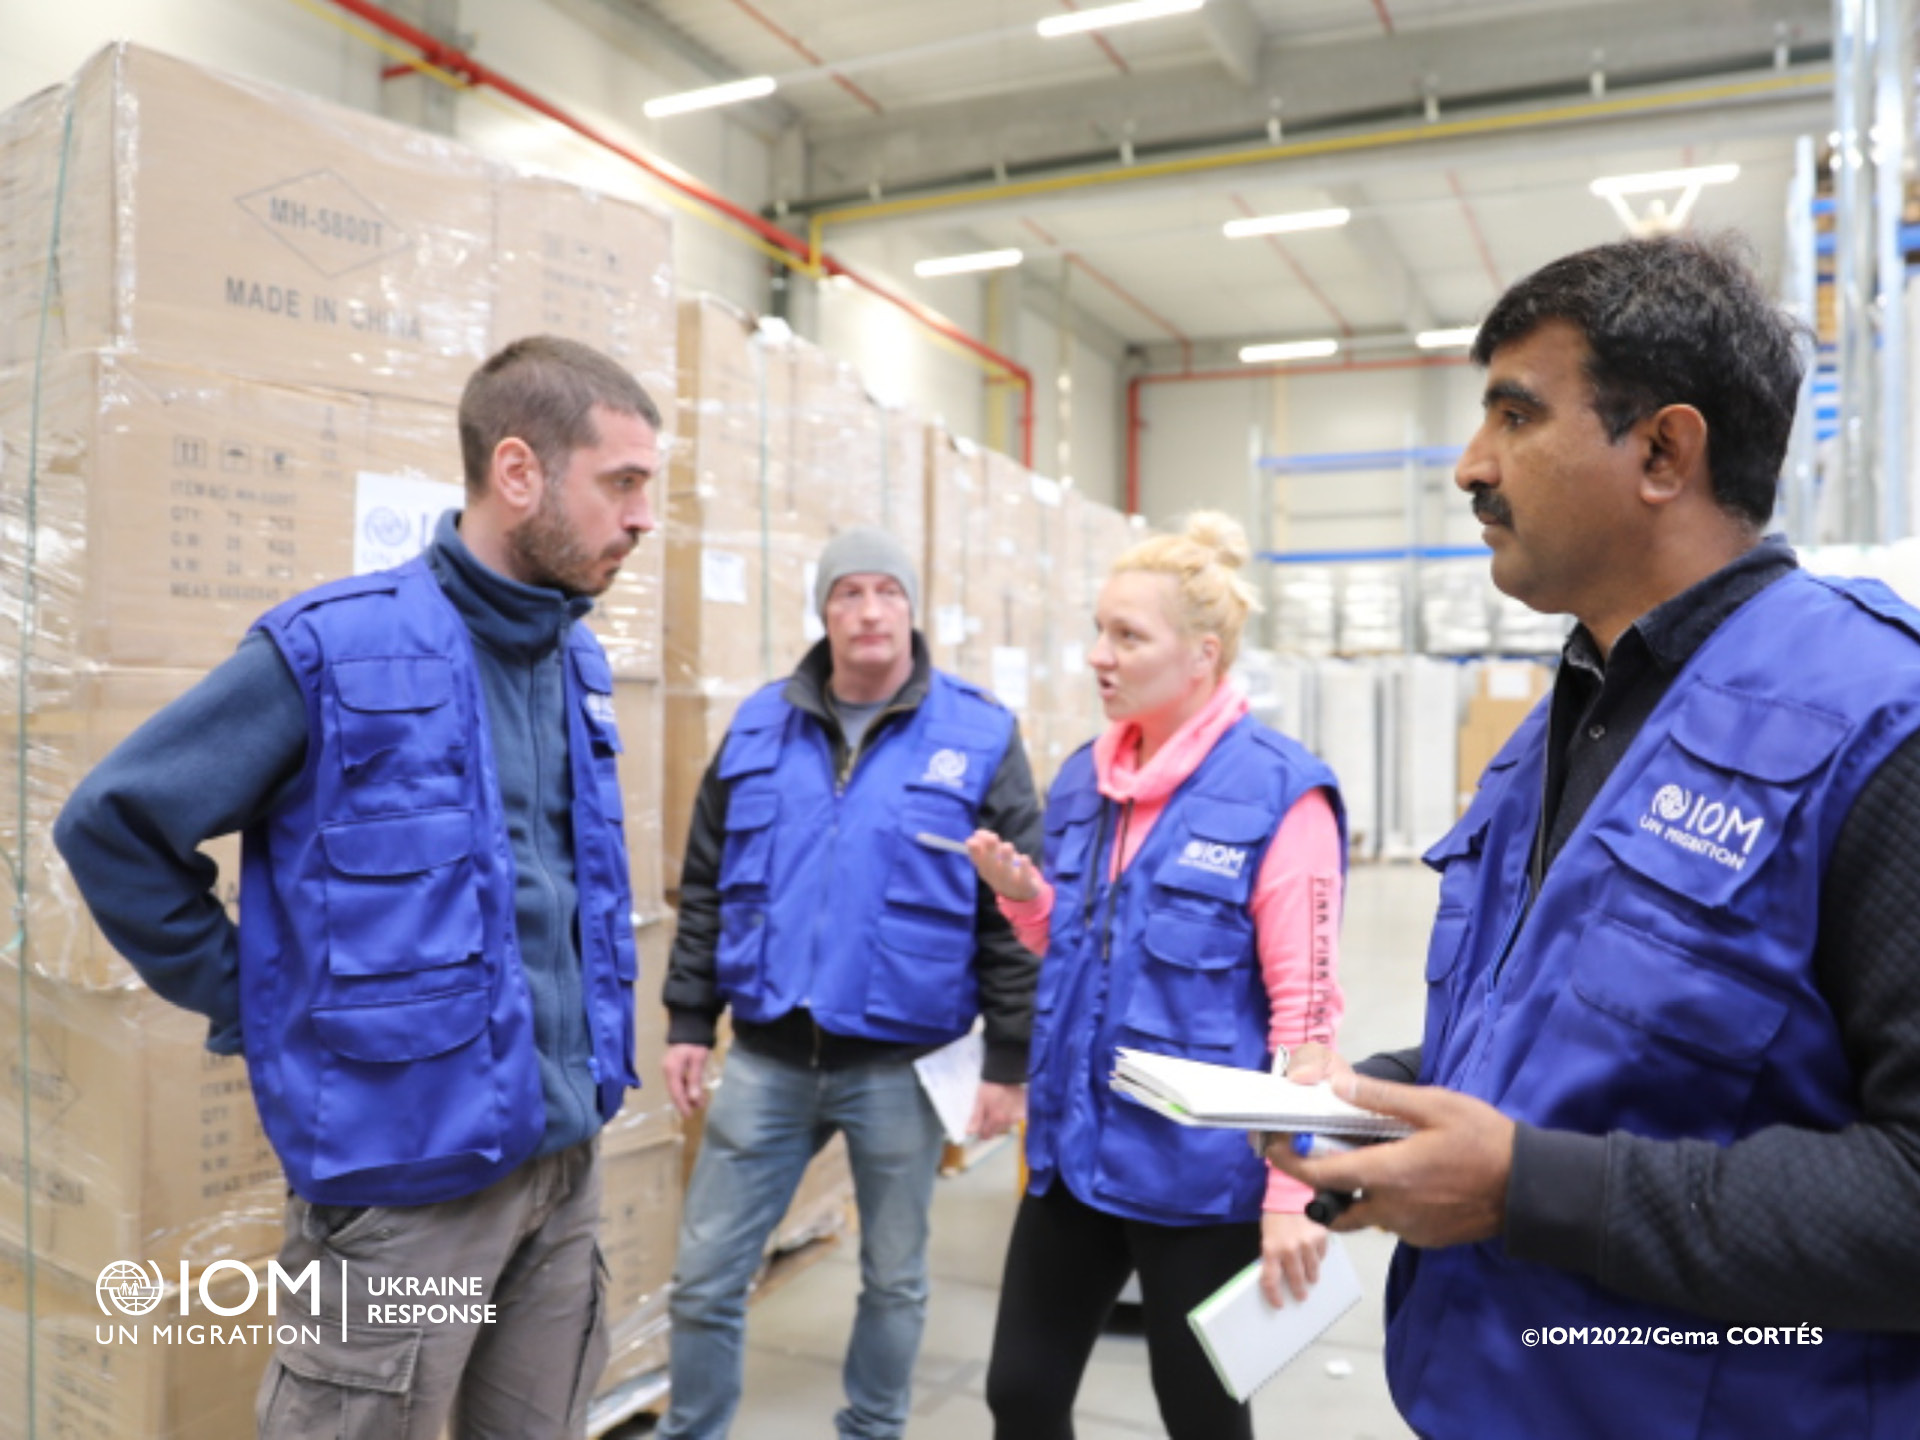 IOM is scaling up its supply chain team to ensure the efficient delivery of aid to displaced people. Photo © IOM / Maria Gema Cortes